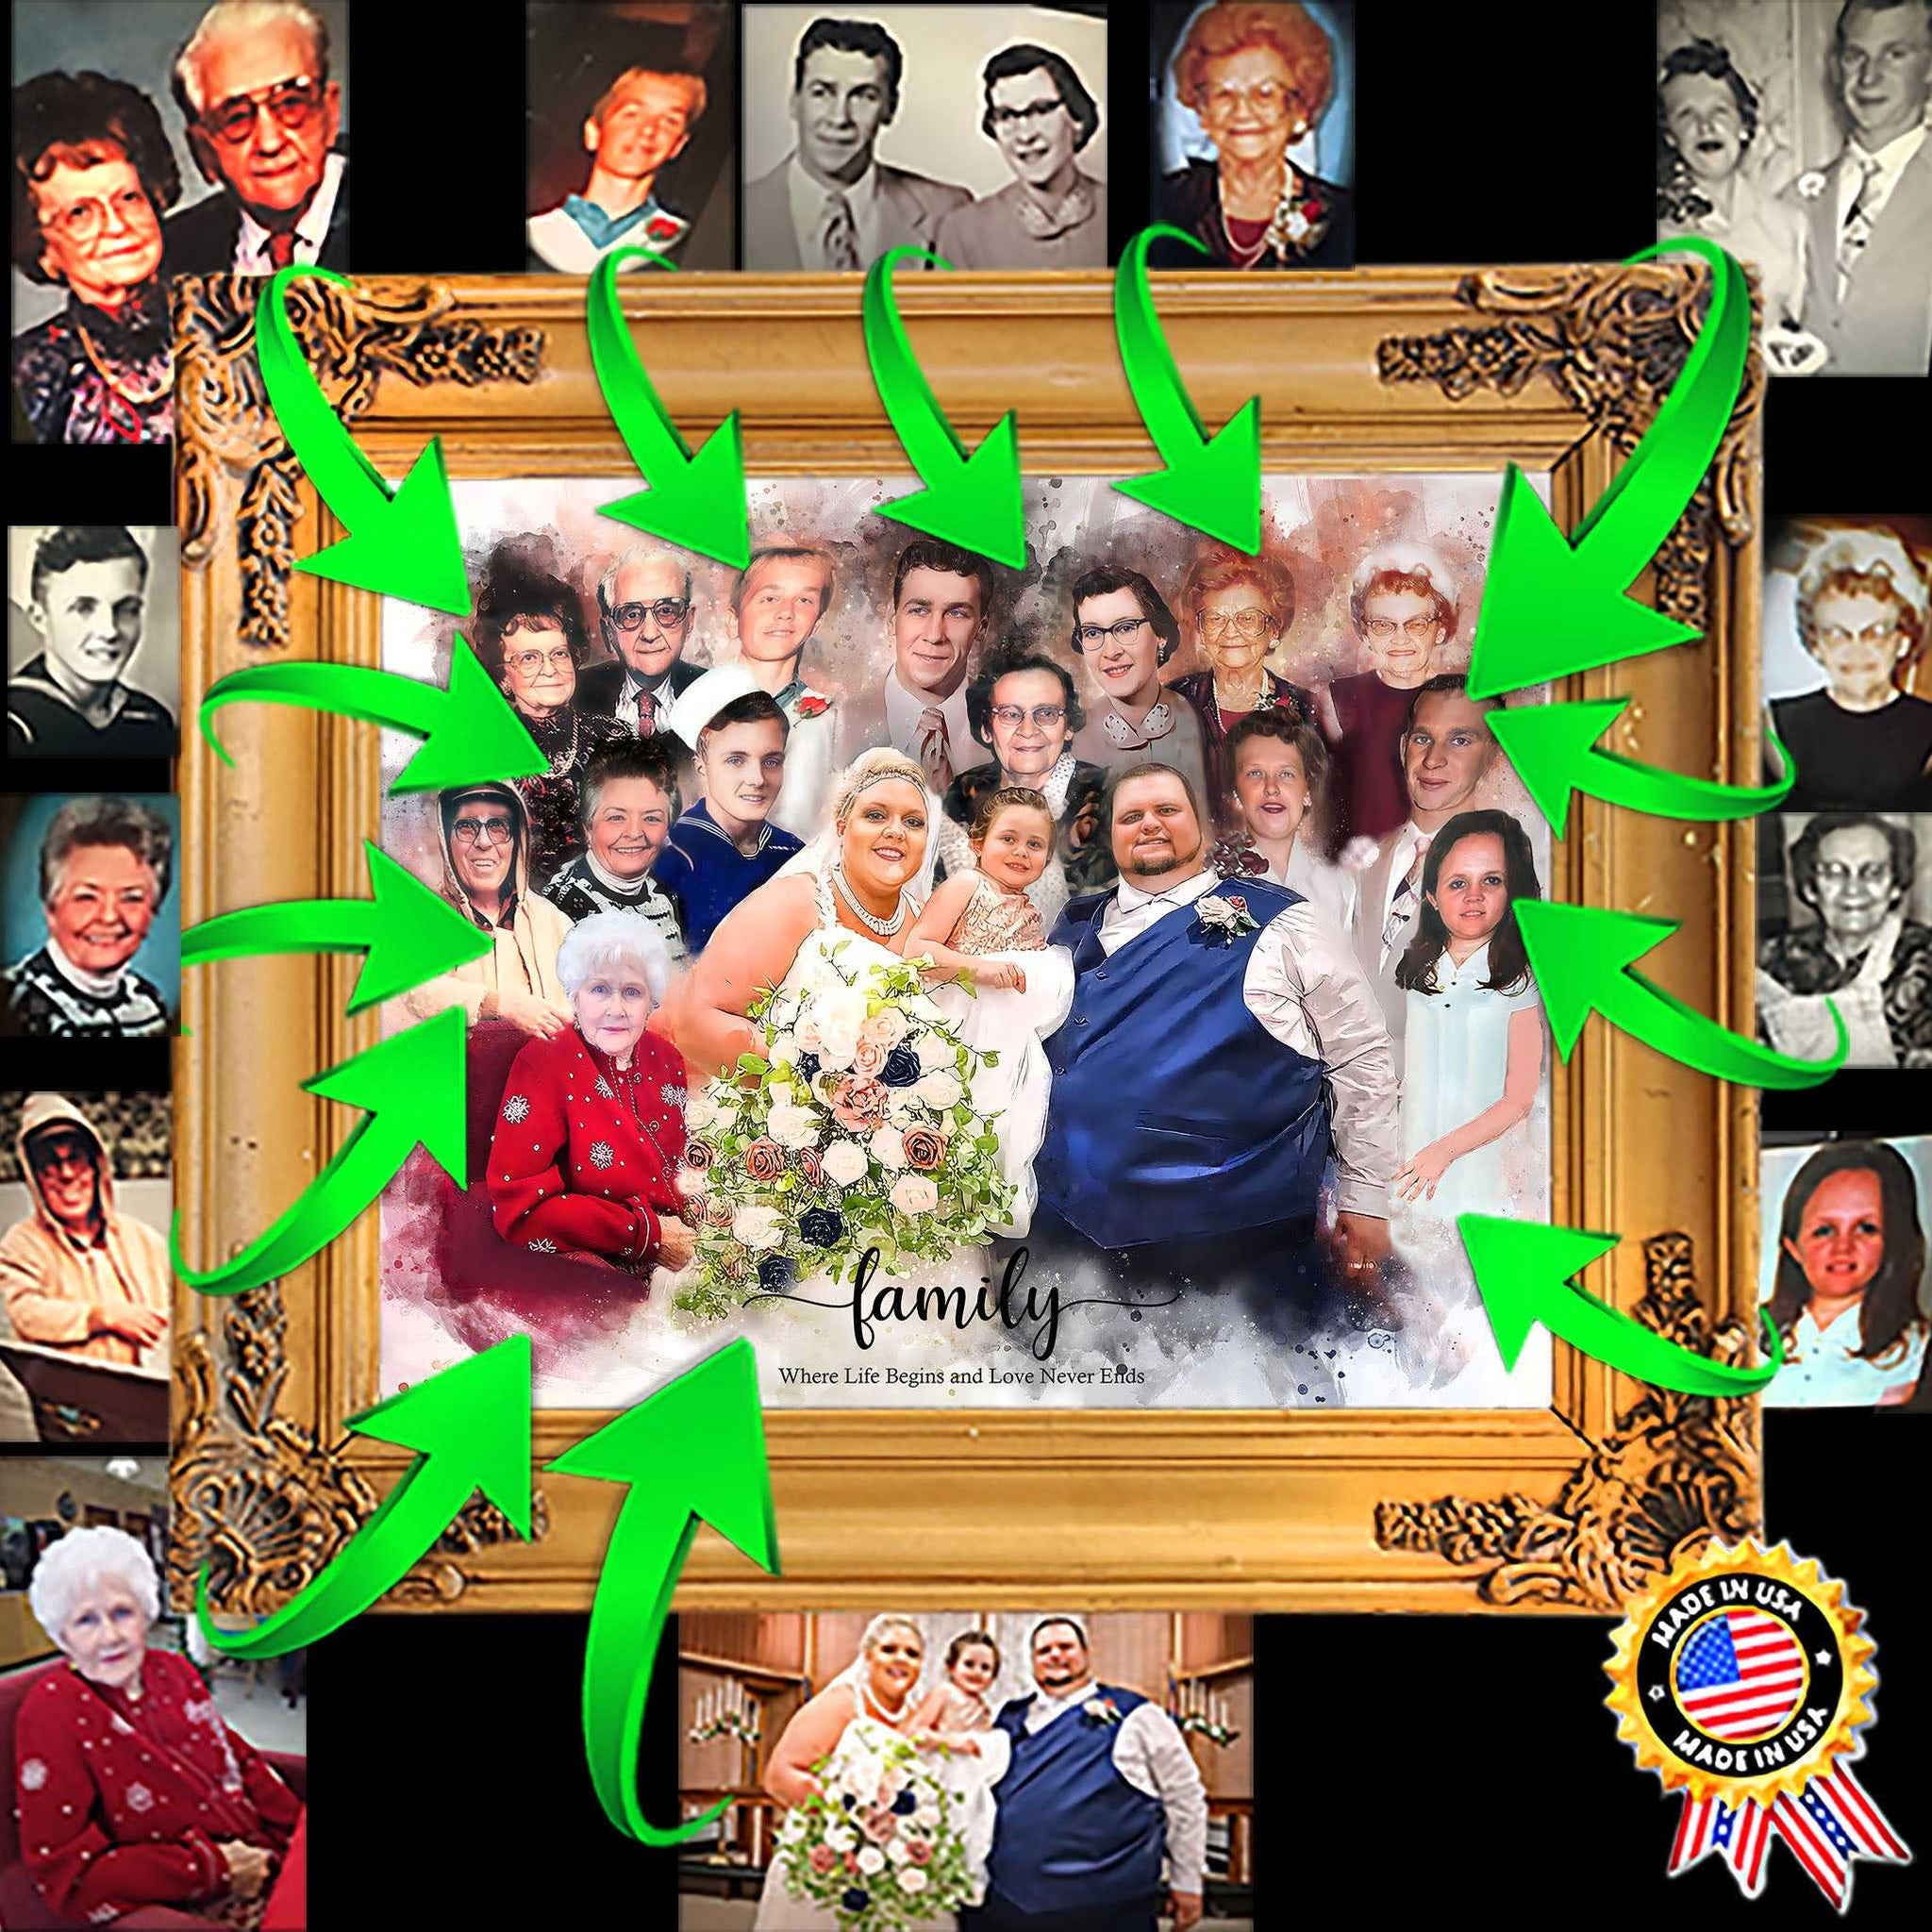 Family Photo with Deceased | Add People to Photo | Add Person to Photo | Add Someone in a Picture - FromPicToArt